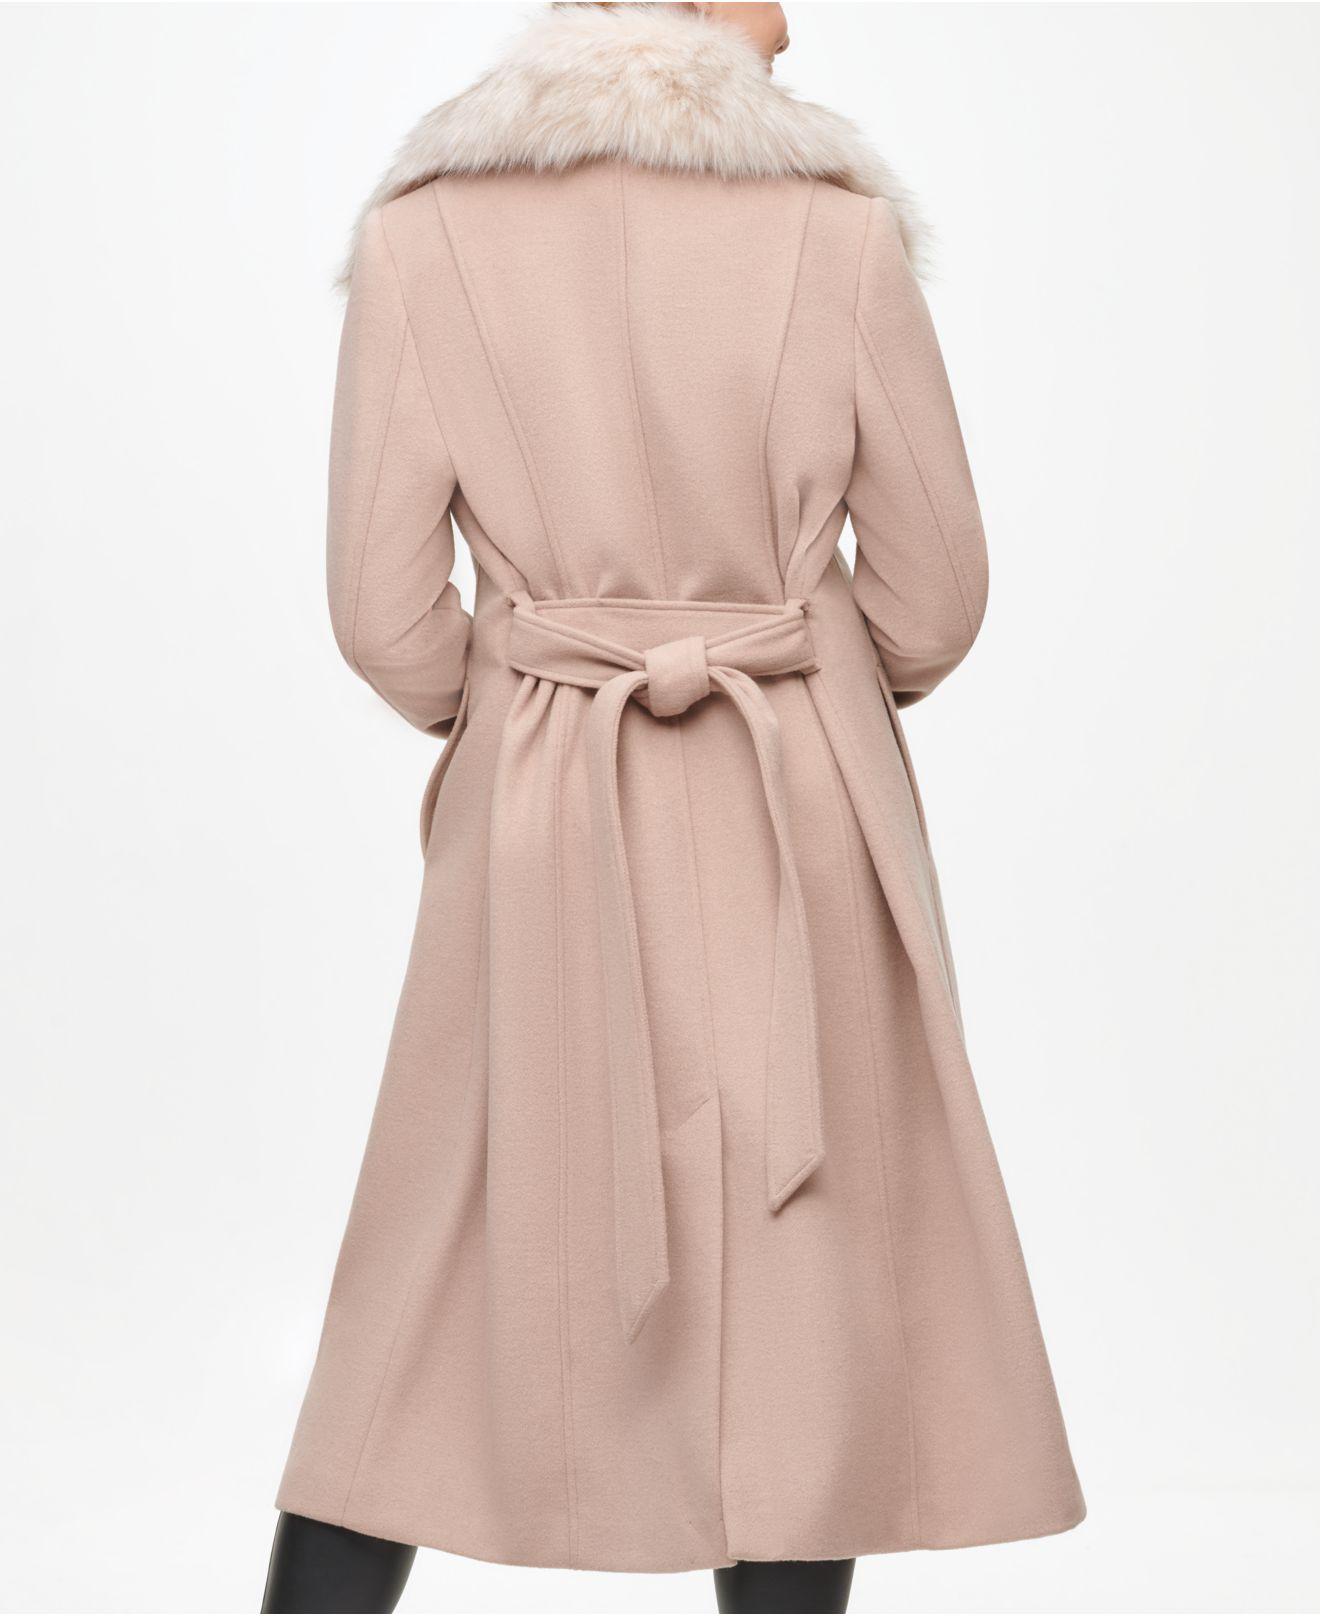 Karl Lagerfeld Faux Fur Collar Belted Wrap Coat in Natural | Lyst